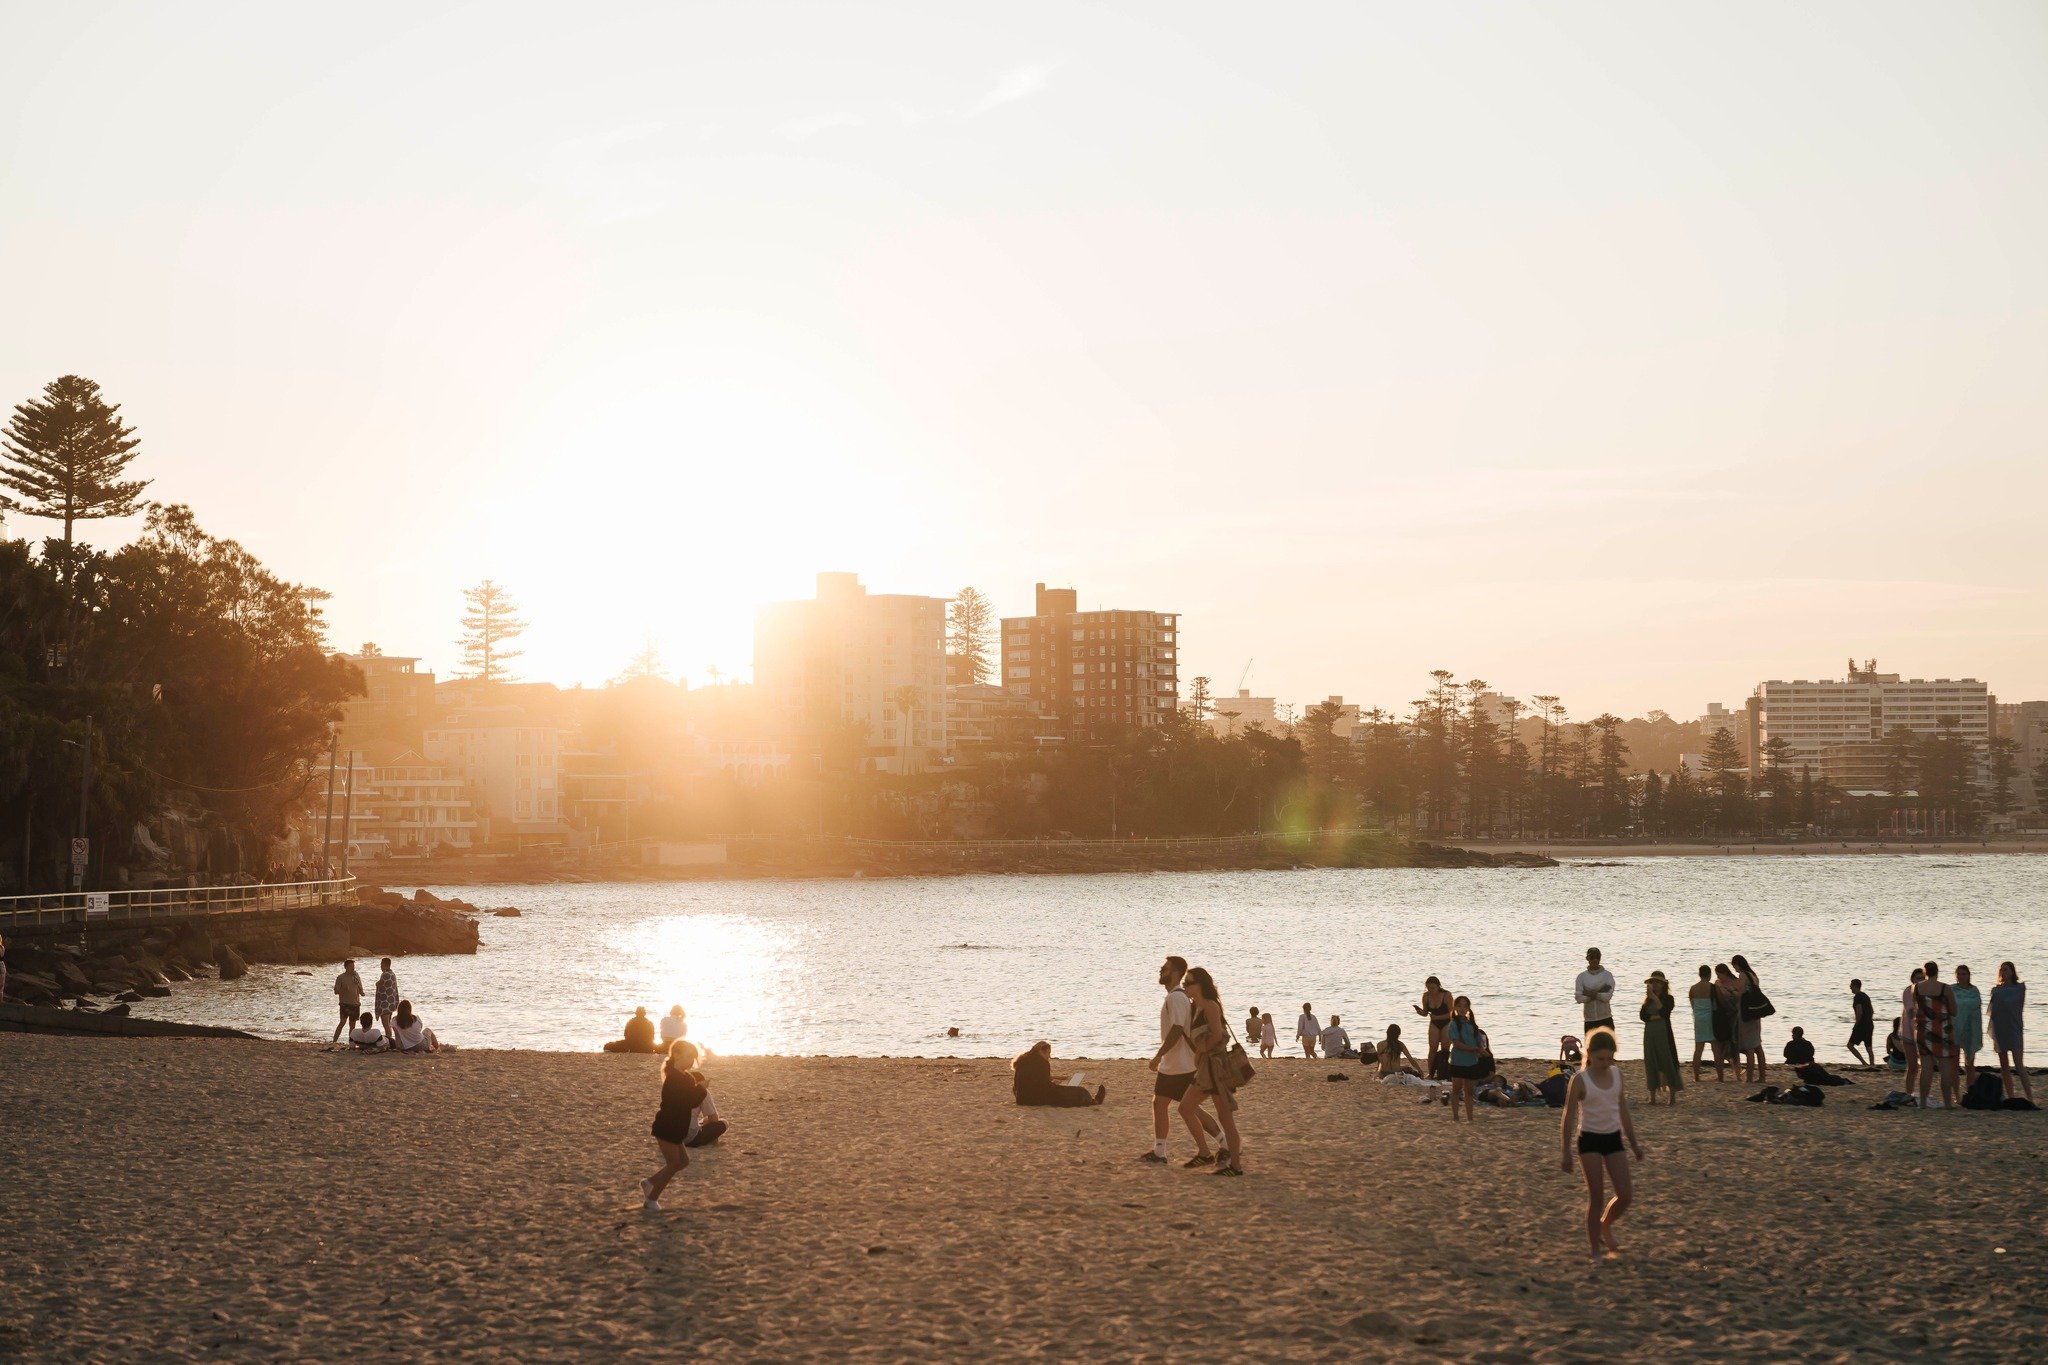 We've loved the long summer of balmy evenings down at Shelly Beach. 

Please note that our trading hours have now been updated for autumn to 7am - 3pm daily with Happy Hour 2pm - 3pm every weekday. 

Come down and try our new breakfast menu or fish s